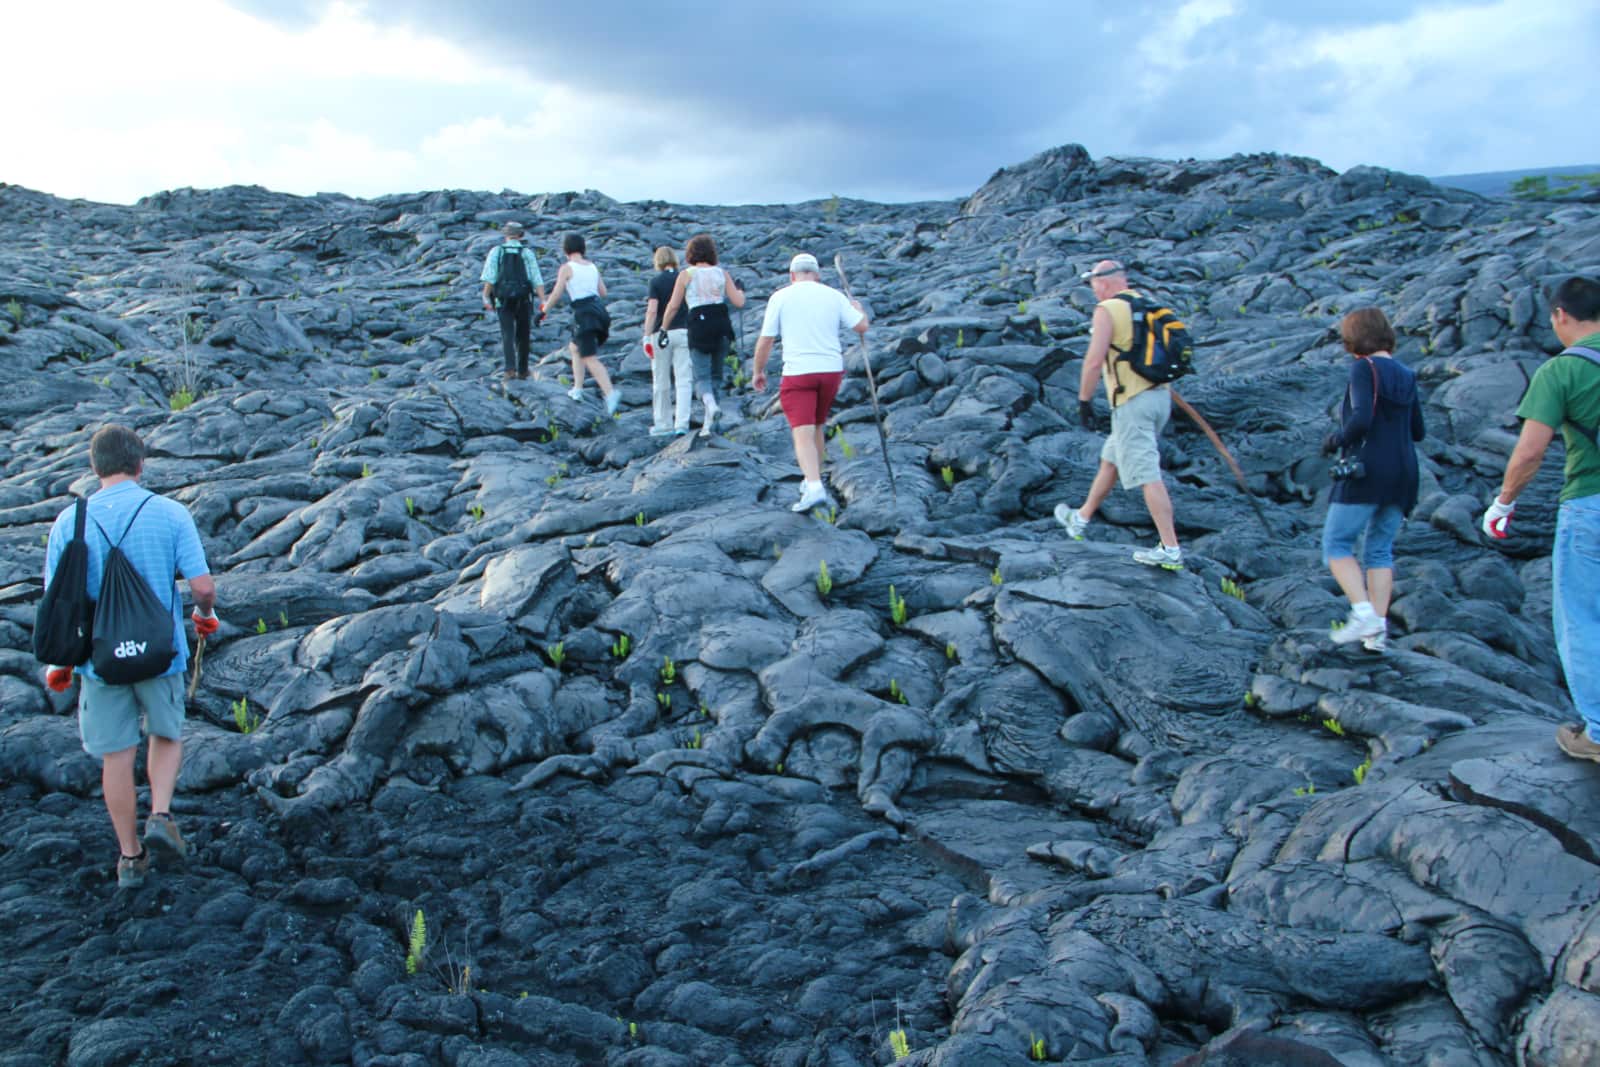 Group of people walking on lava in Hawaii